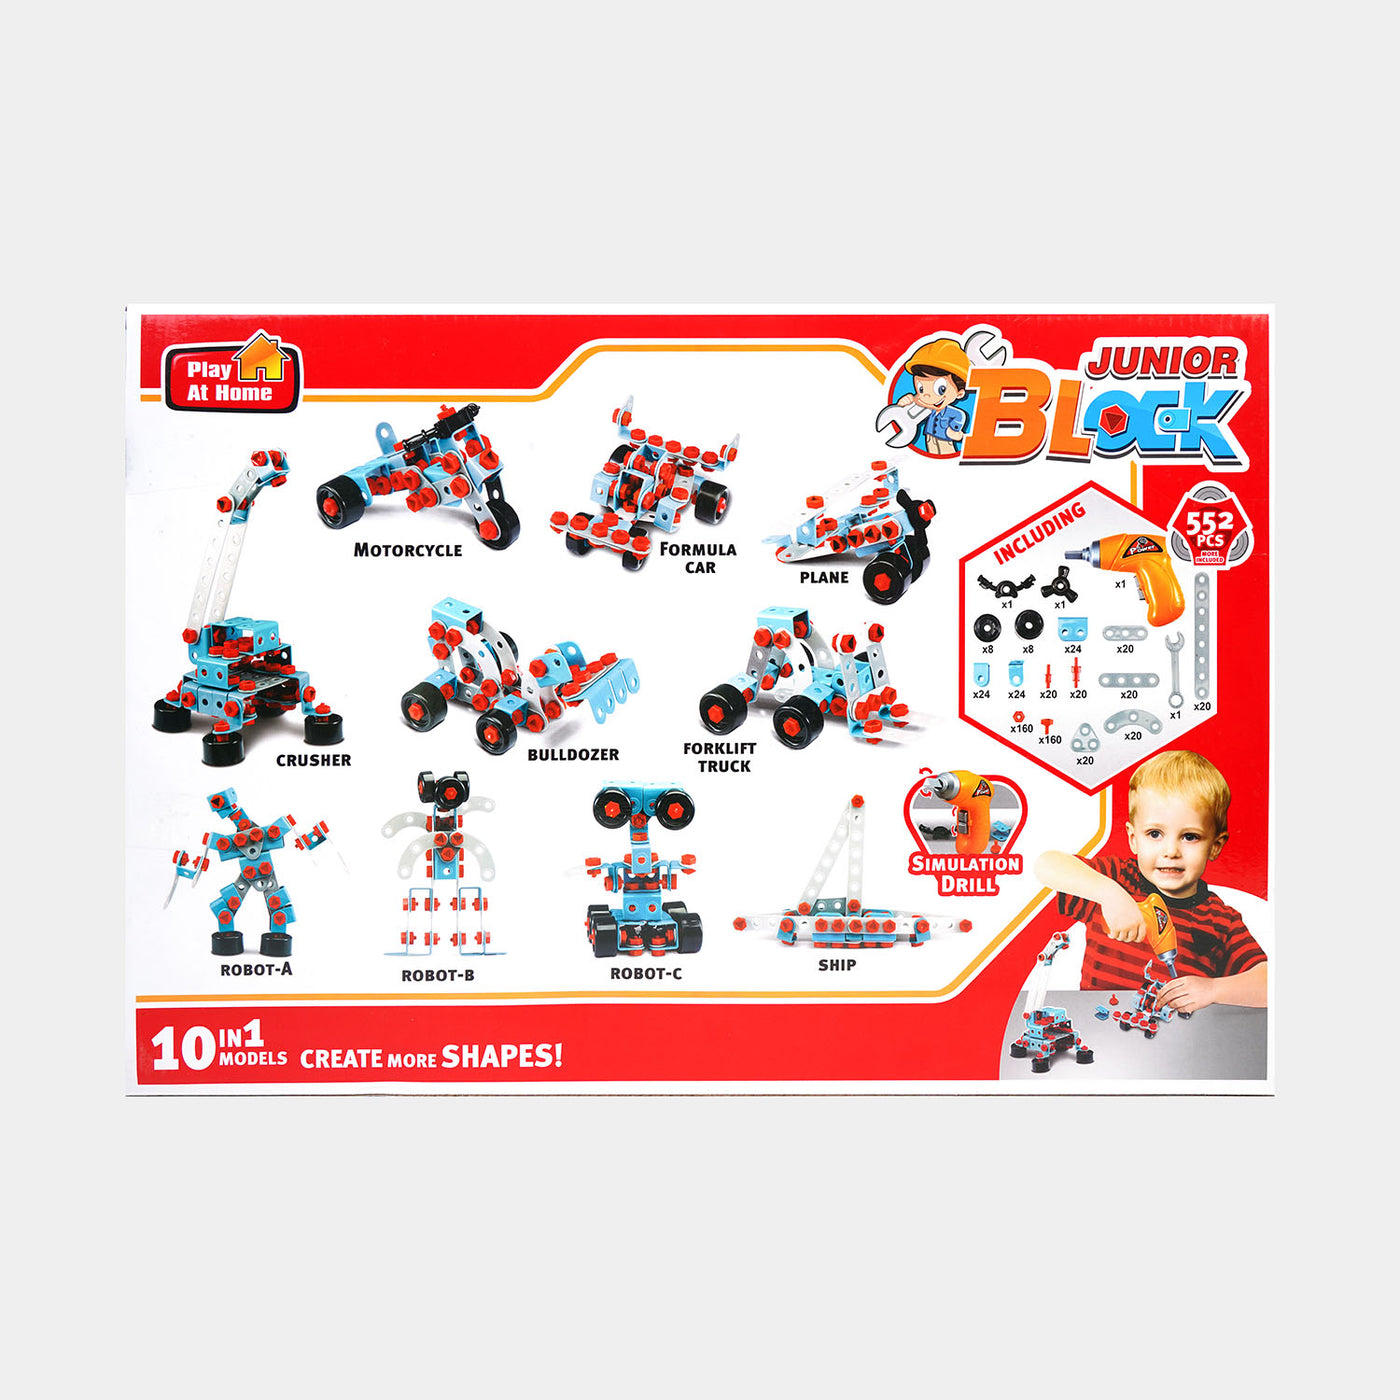 Junior Engineer Kids Construction Tool Kit with Battery Operated Drill | 552PCS